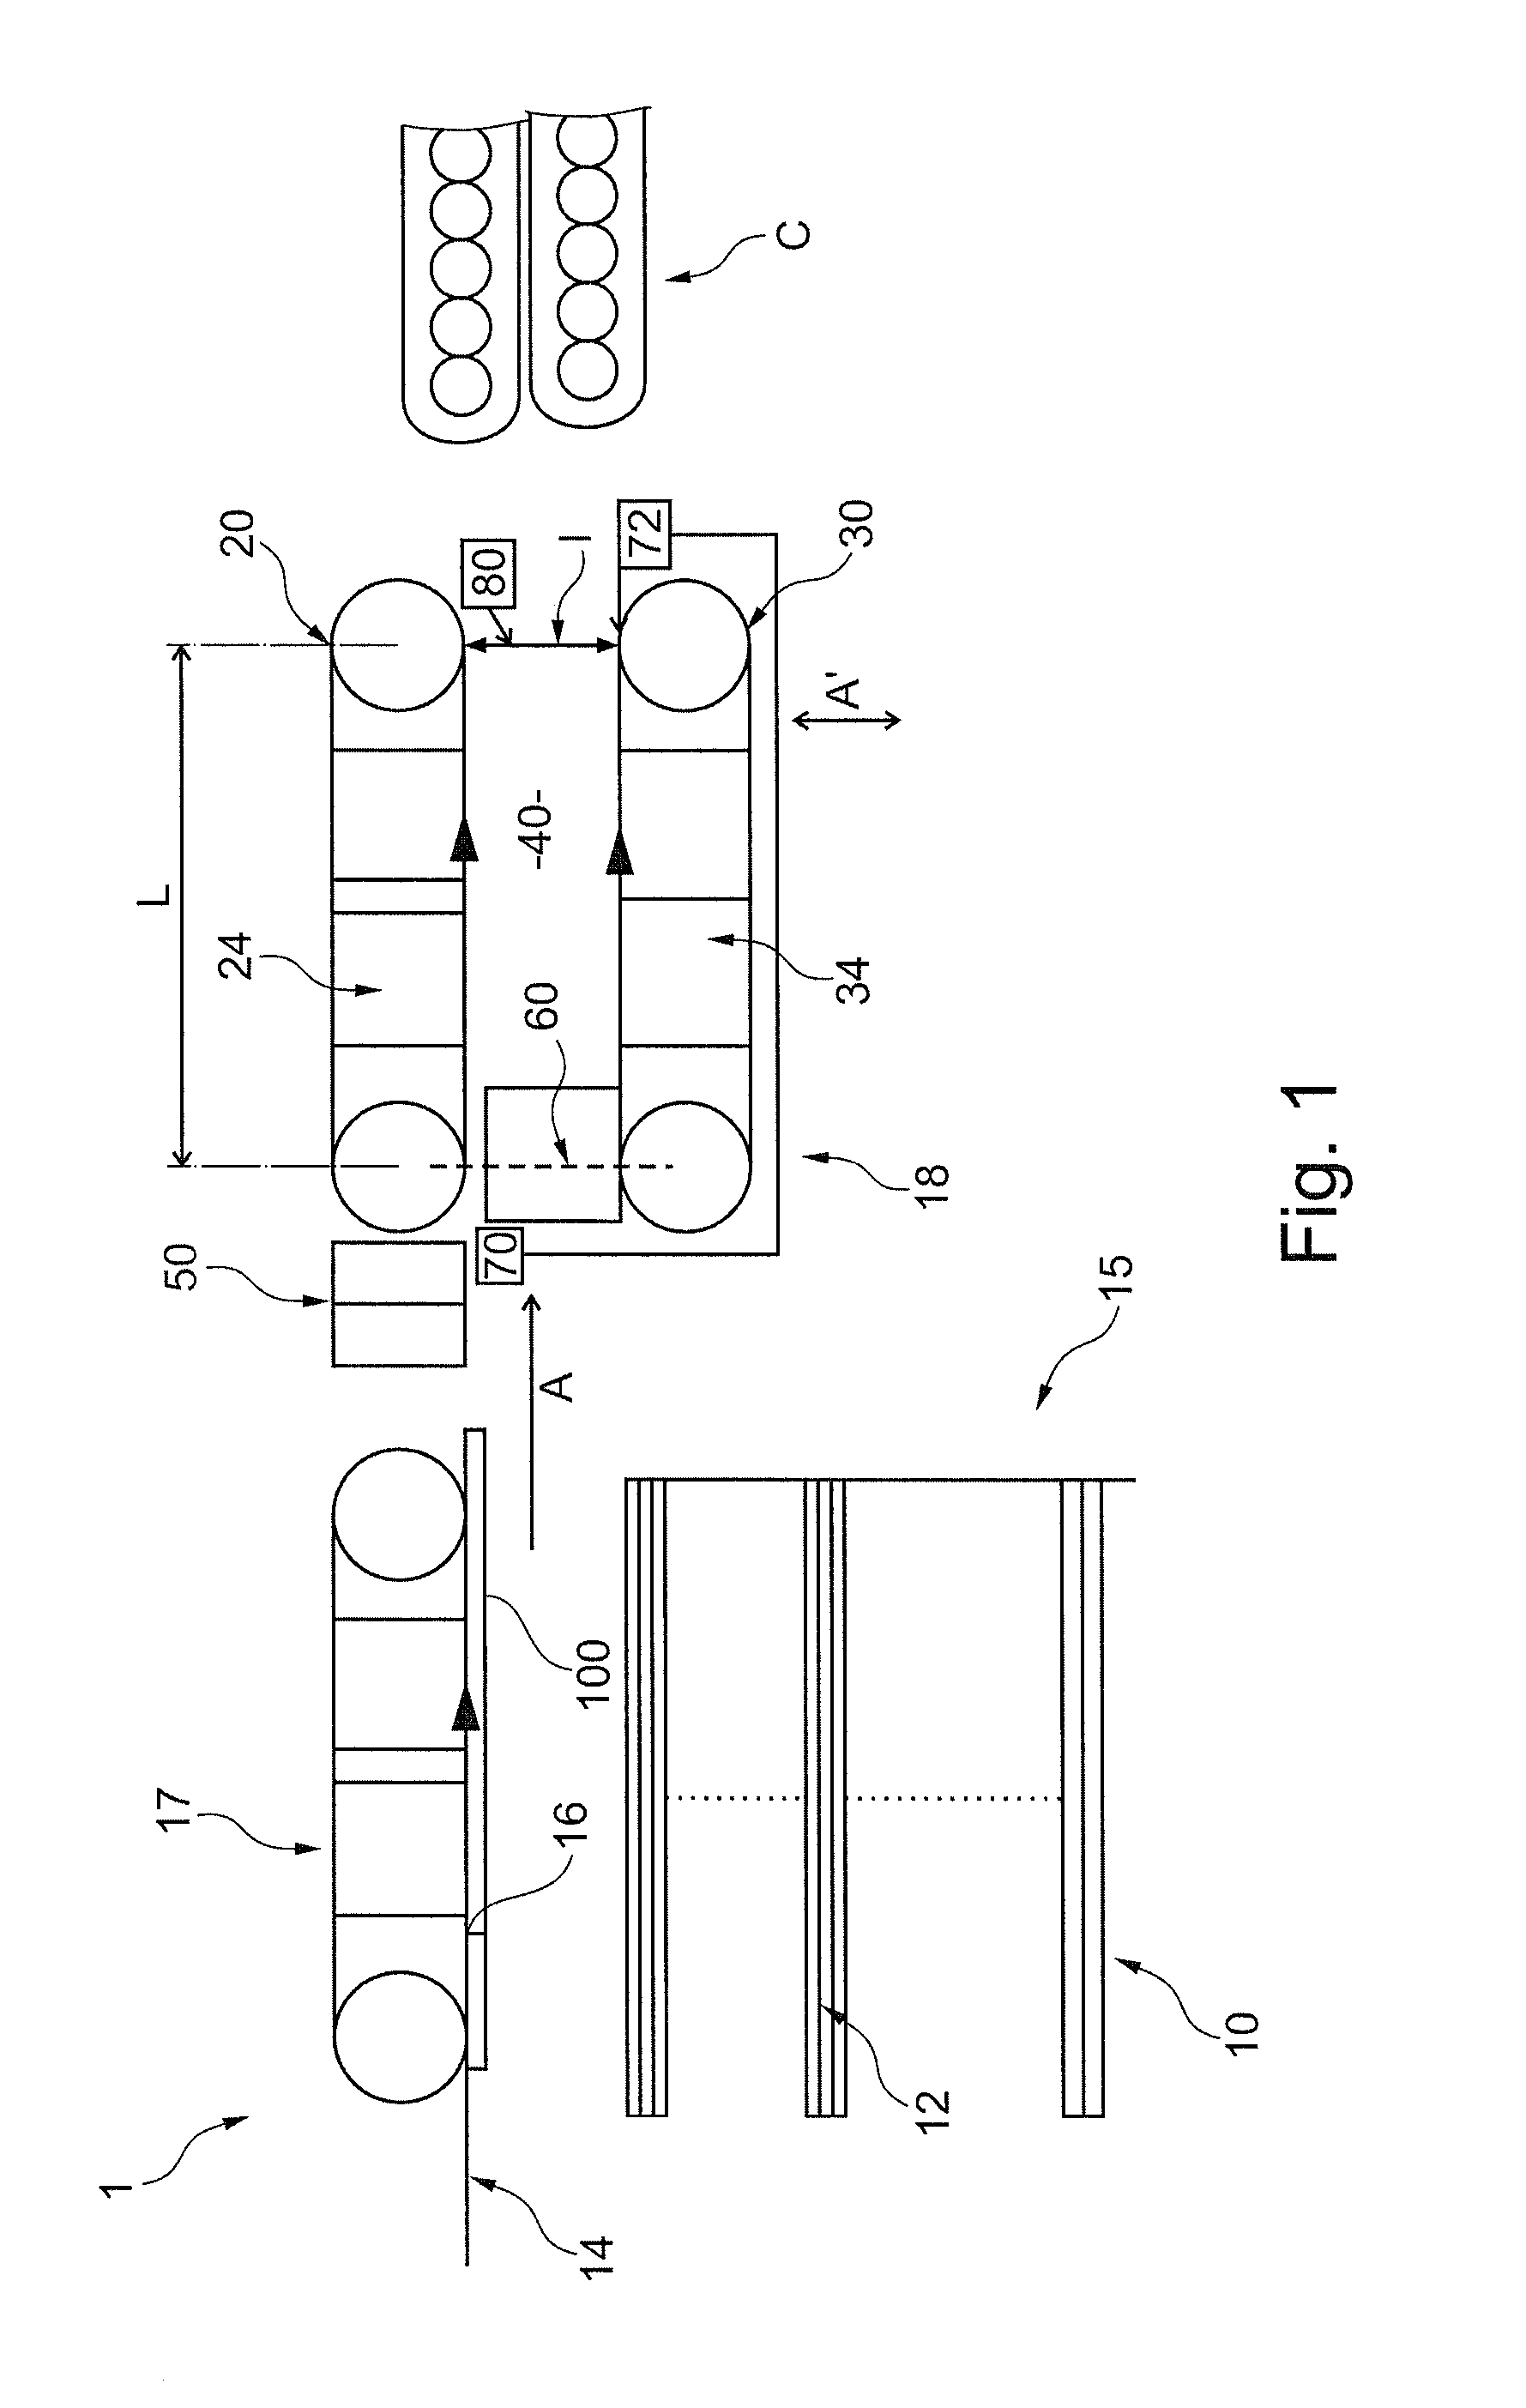 Device for separating flat articles, a corresponding control method, and a corresponding postal machine